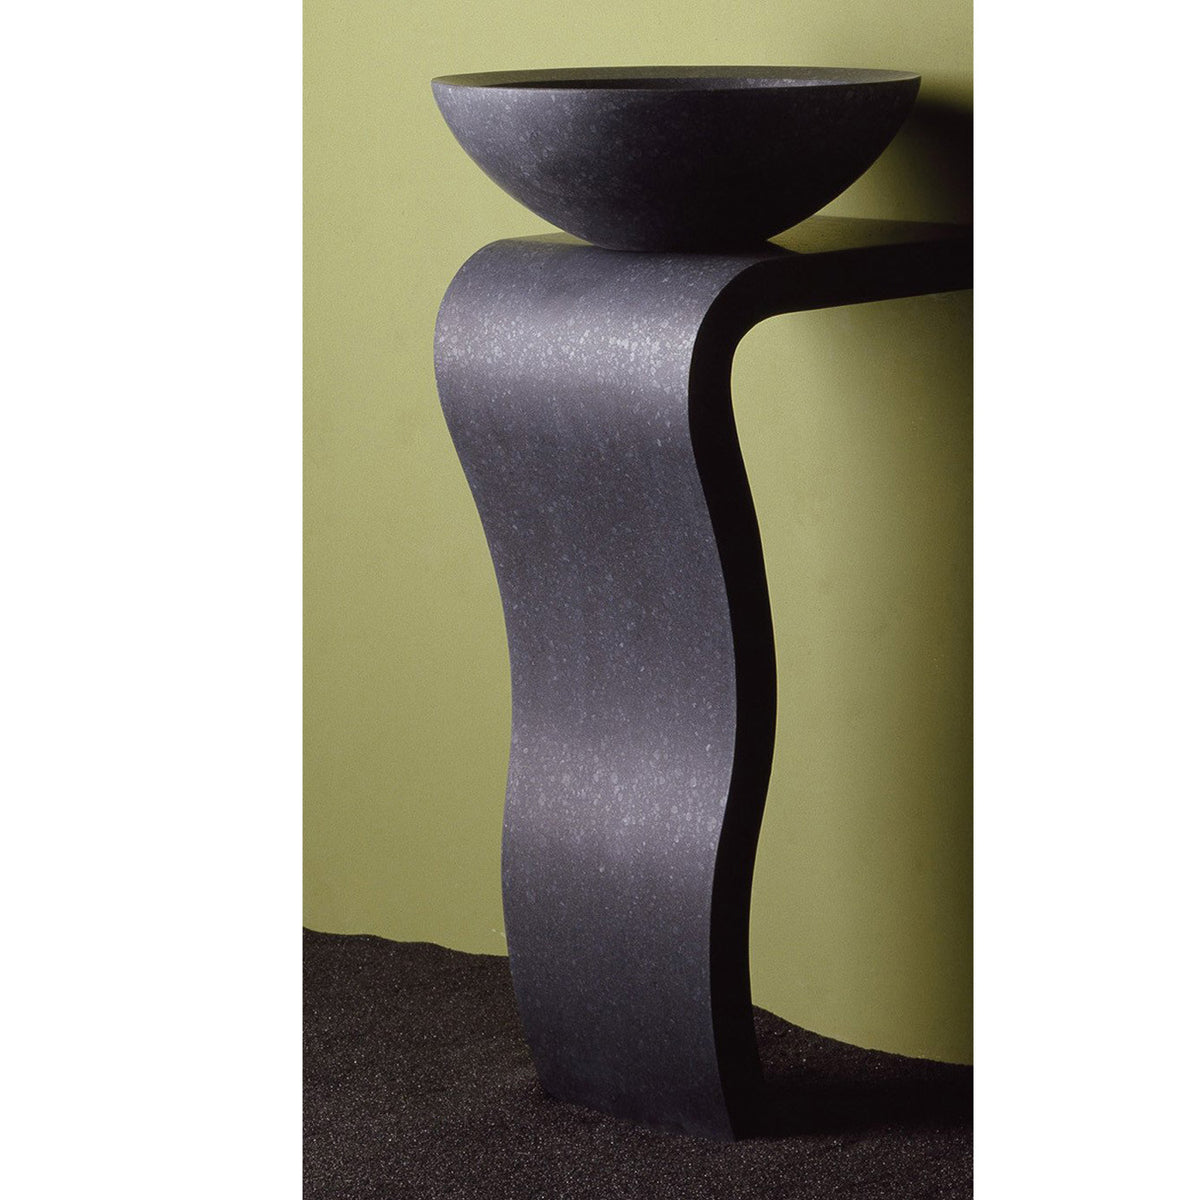 Stone Forest Wave Pedestal in honed basalt with the Bevel Vessel sink, carved from a solid block of stone. image 3 of 3